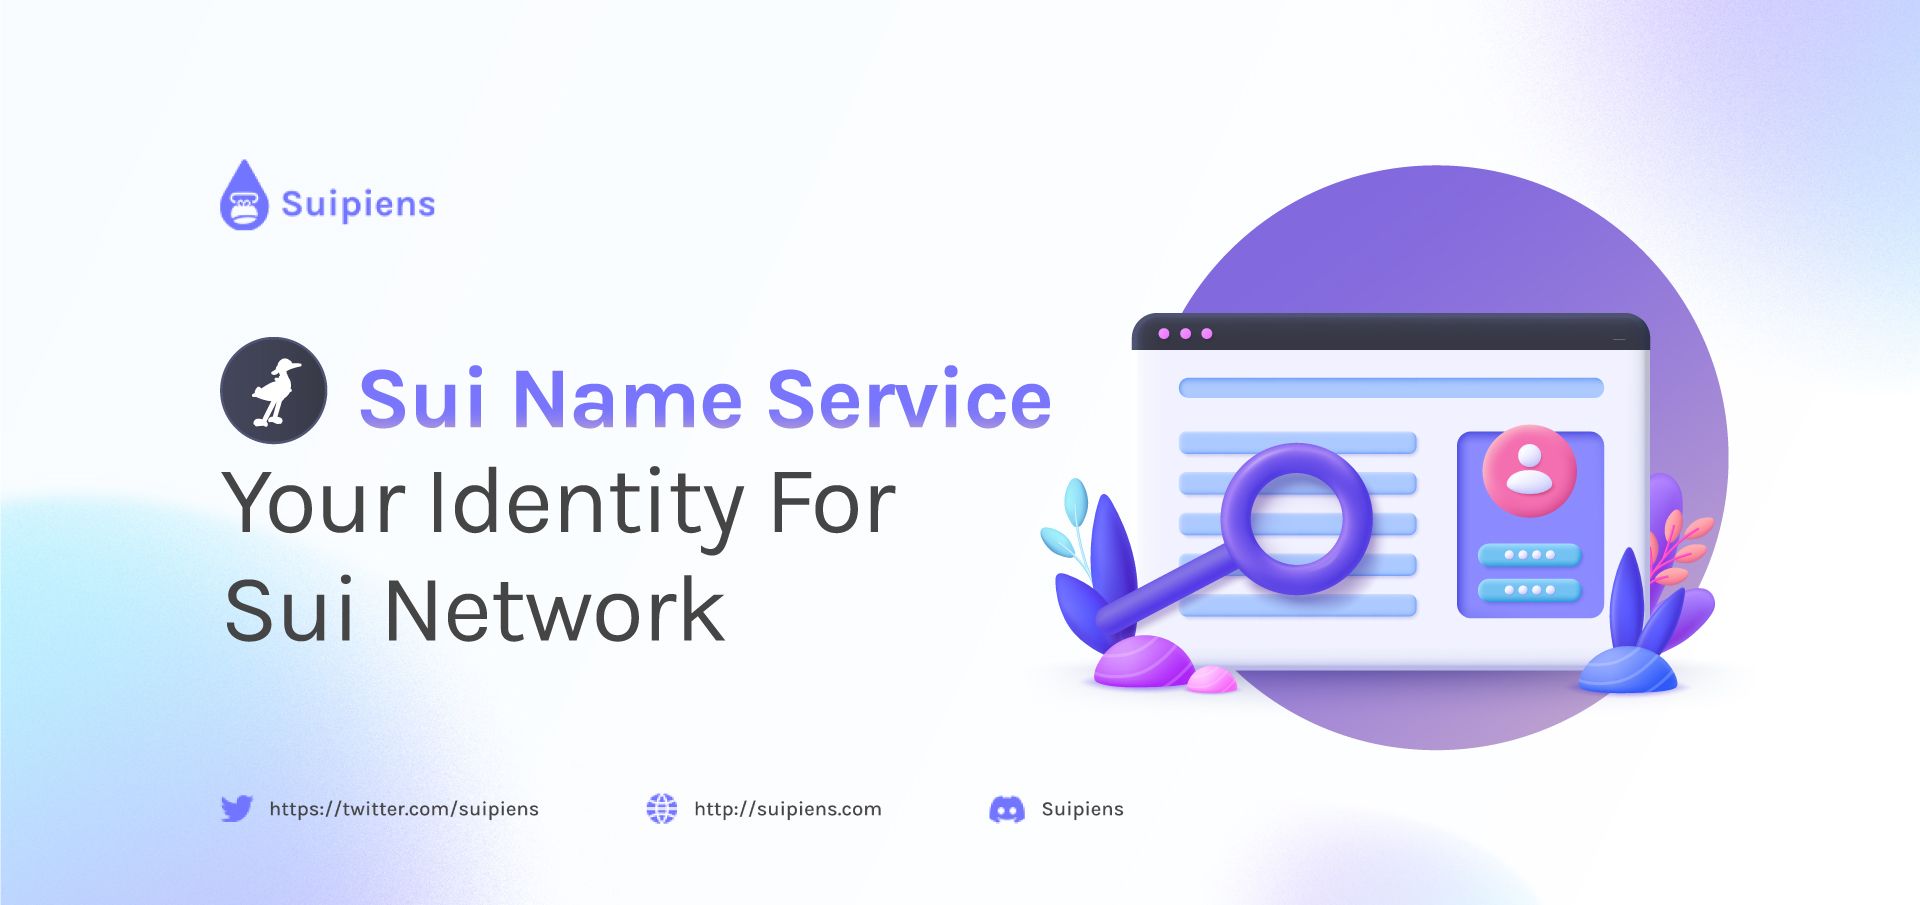 Sui Name Service: Your Identity For Sui Network